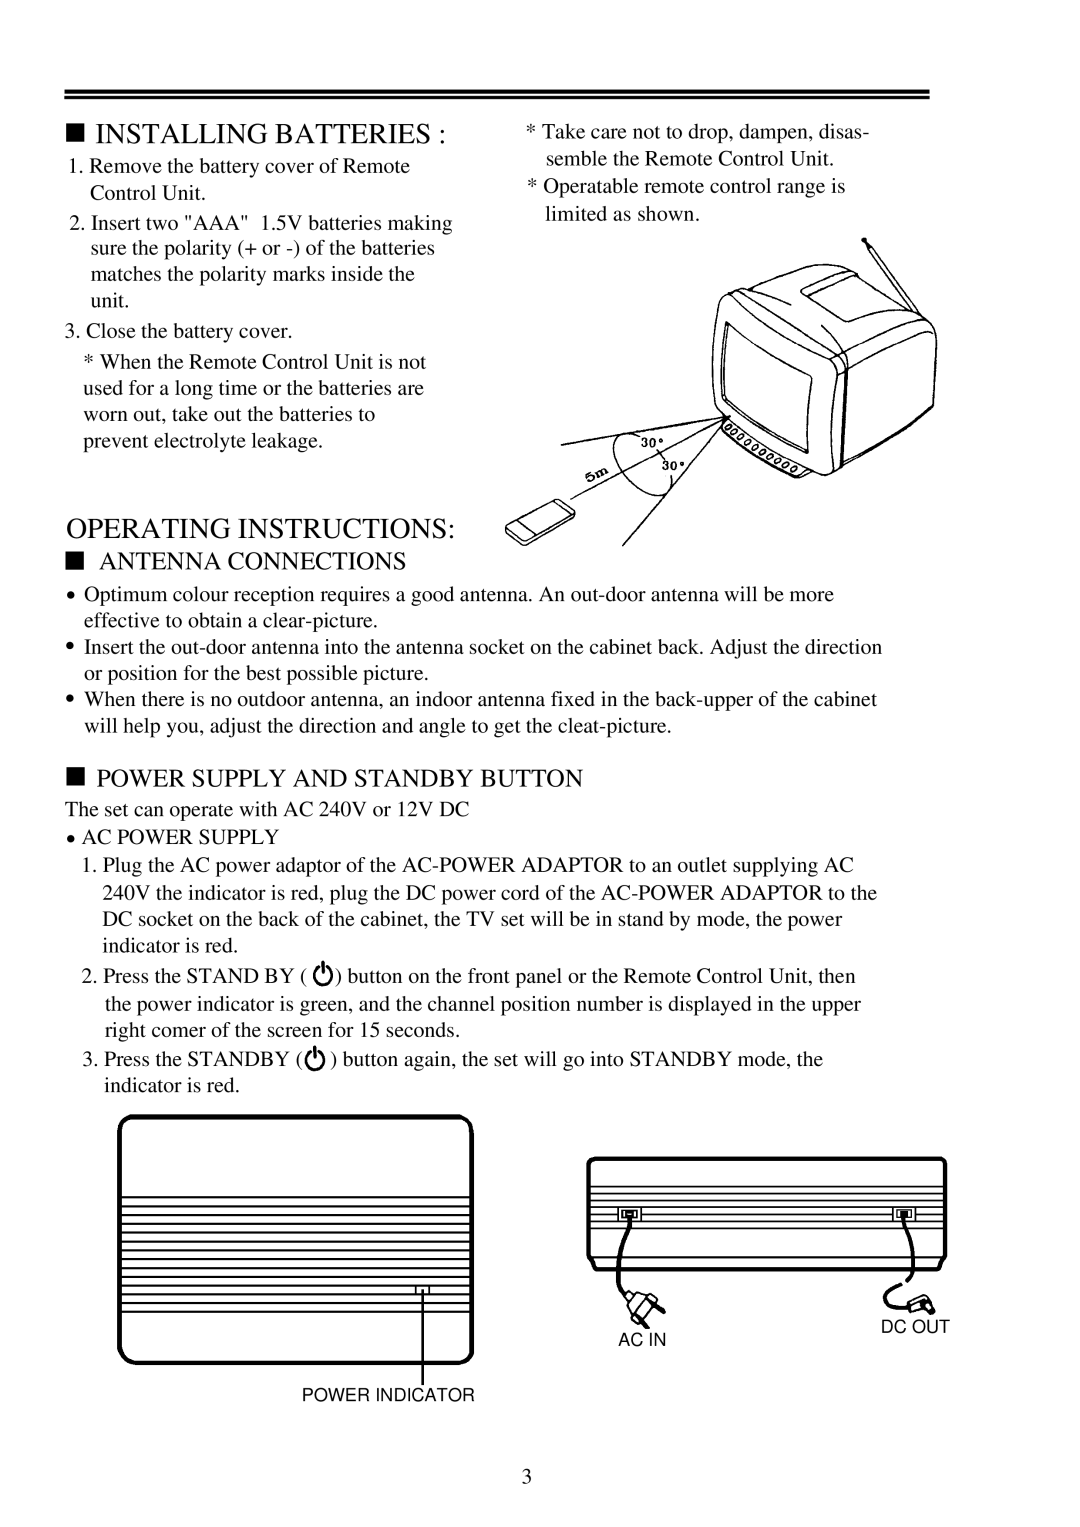 Palsonic 2418 Antenna Connections, Power Supply And Standby Button, Installing Batteries, Operating Instructions 